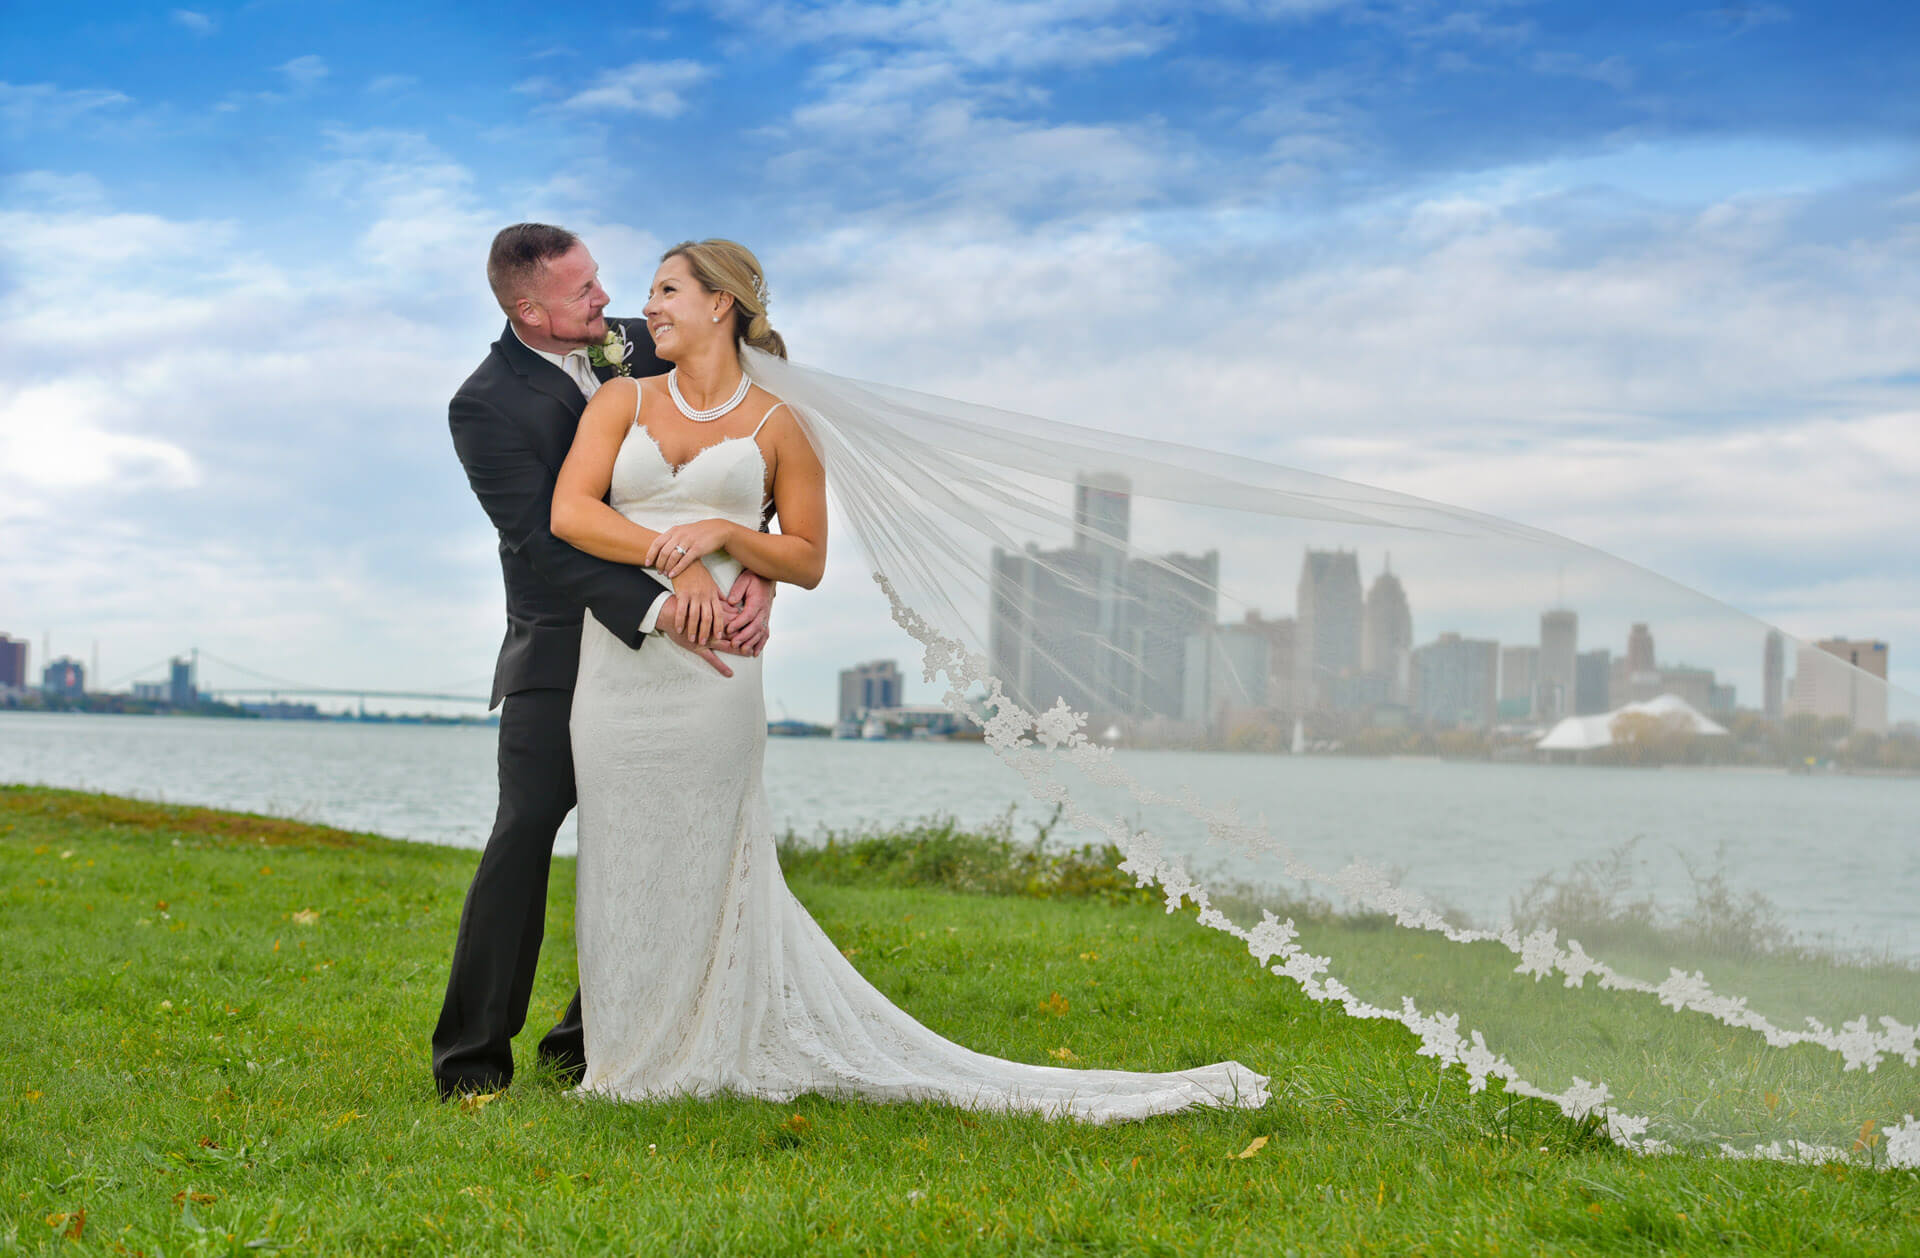 Epic Wedding portrait showing the bride and groom at the point on Belle Isle after their wedding on Belle Isle in Detroit, Michigan.